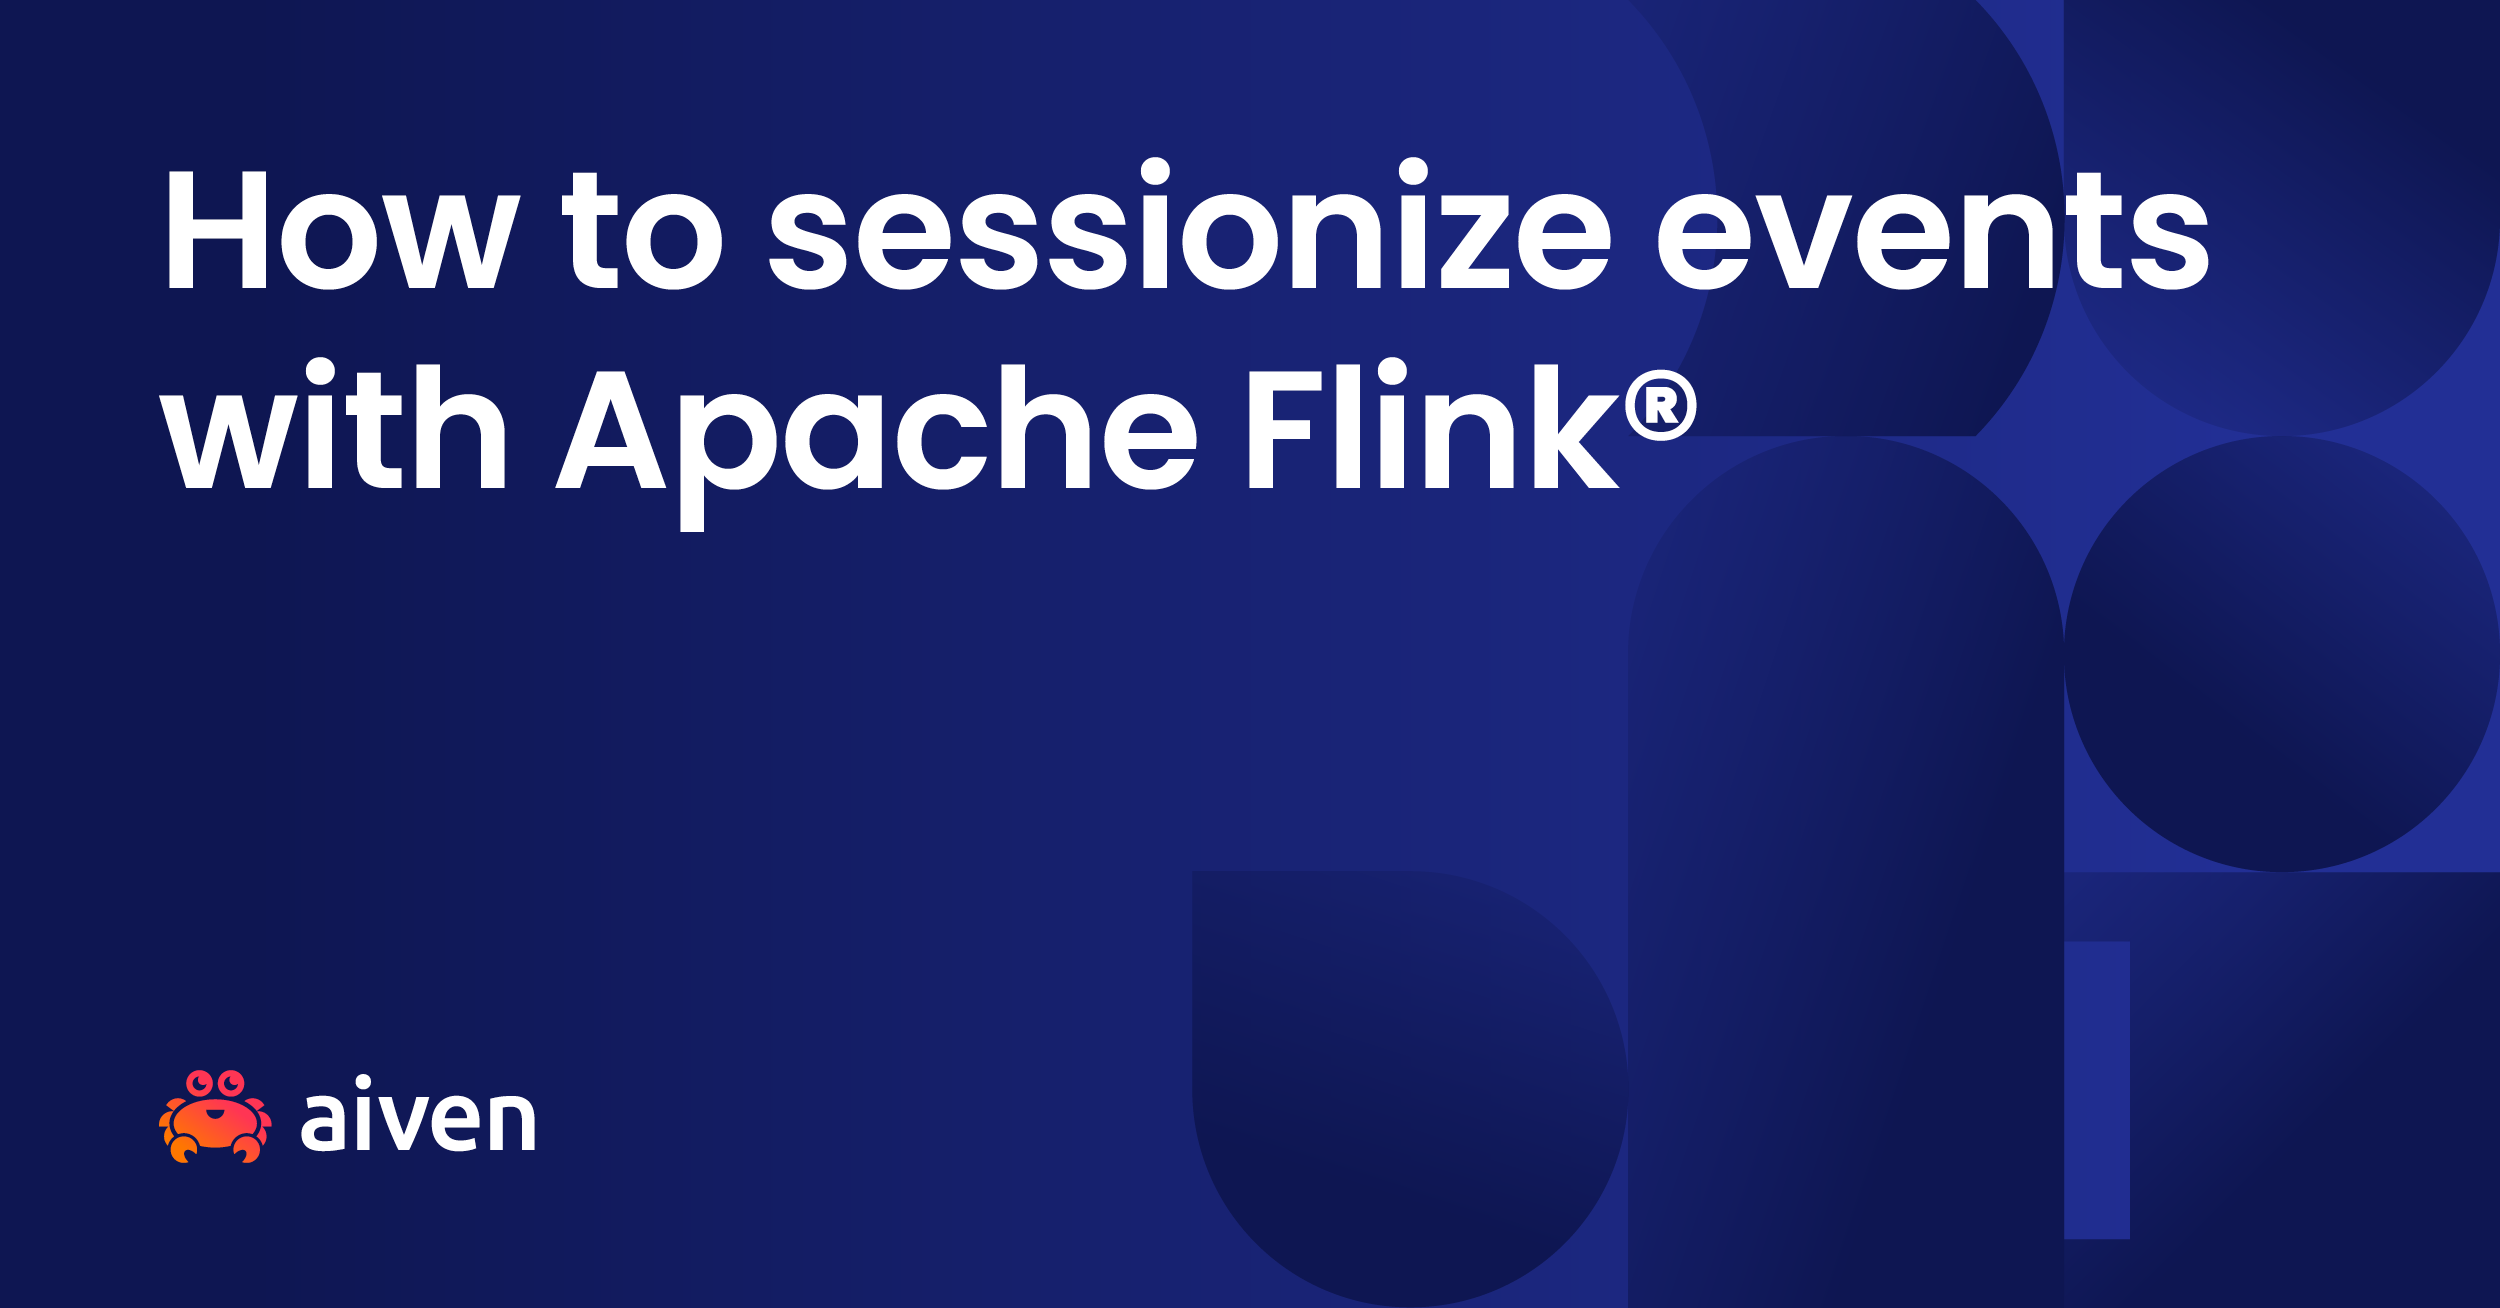 How to sessionize events with Apache Flink® illustration